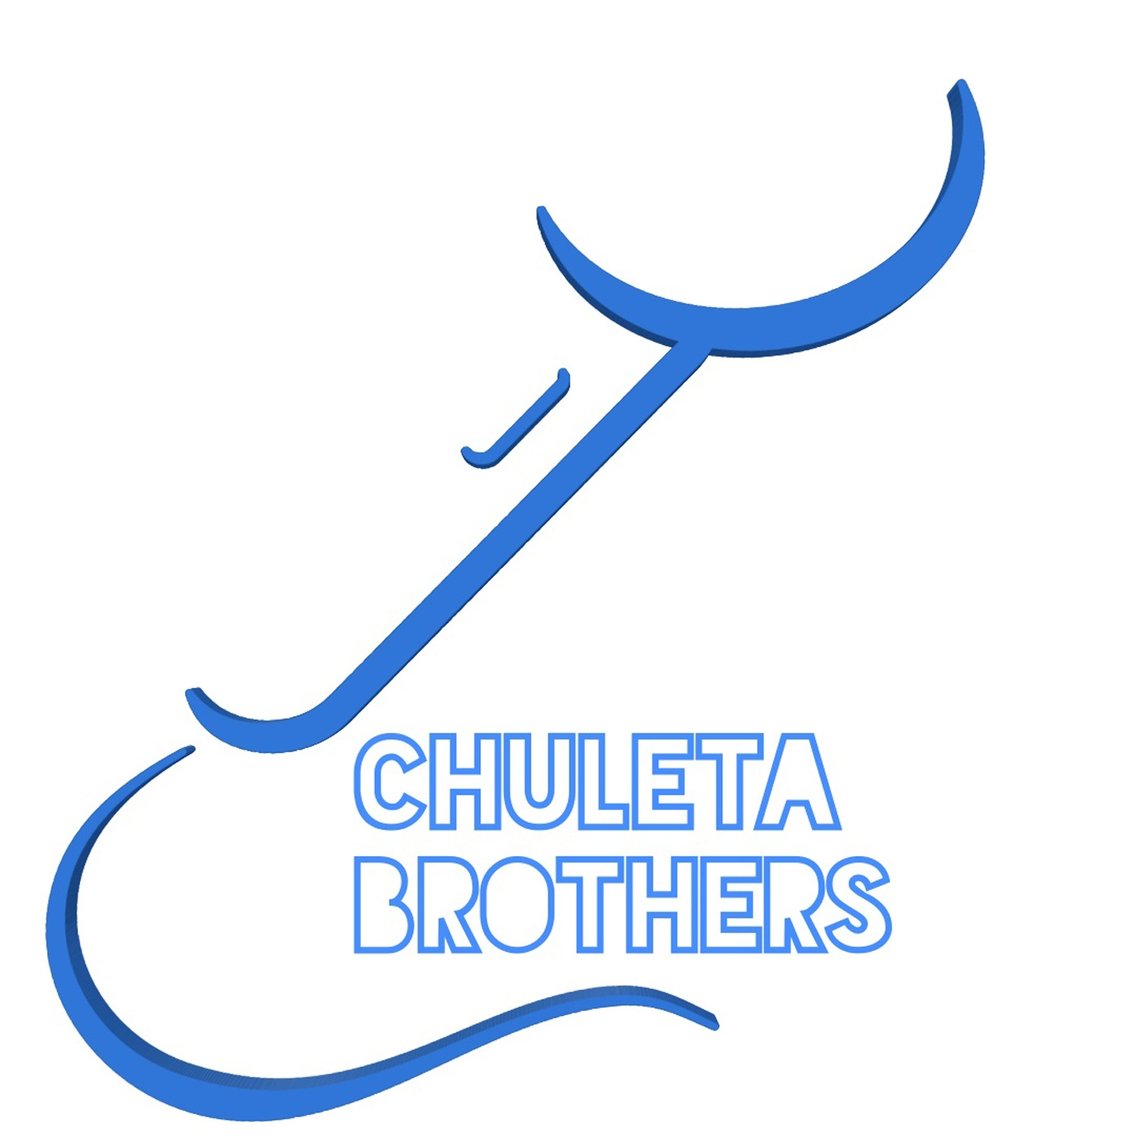 Chuleta Brothers Podcast - Cover Image